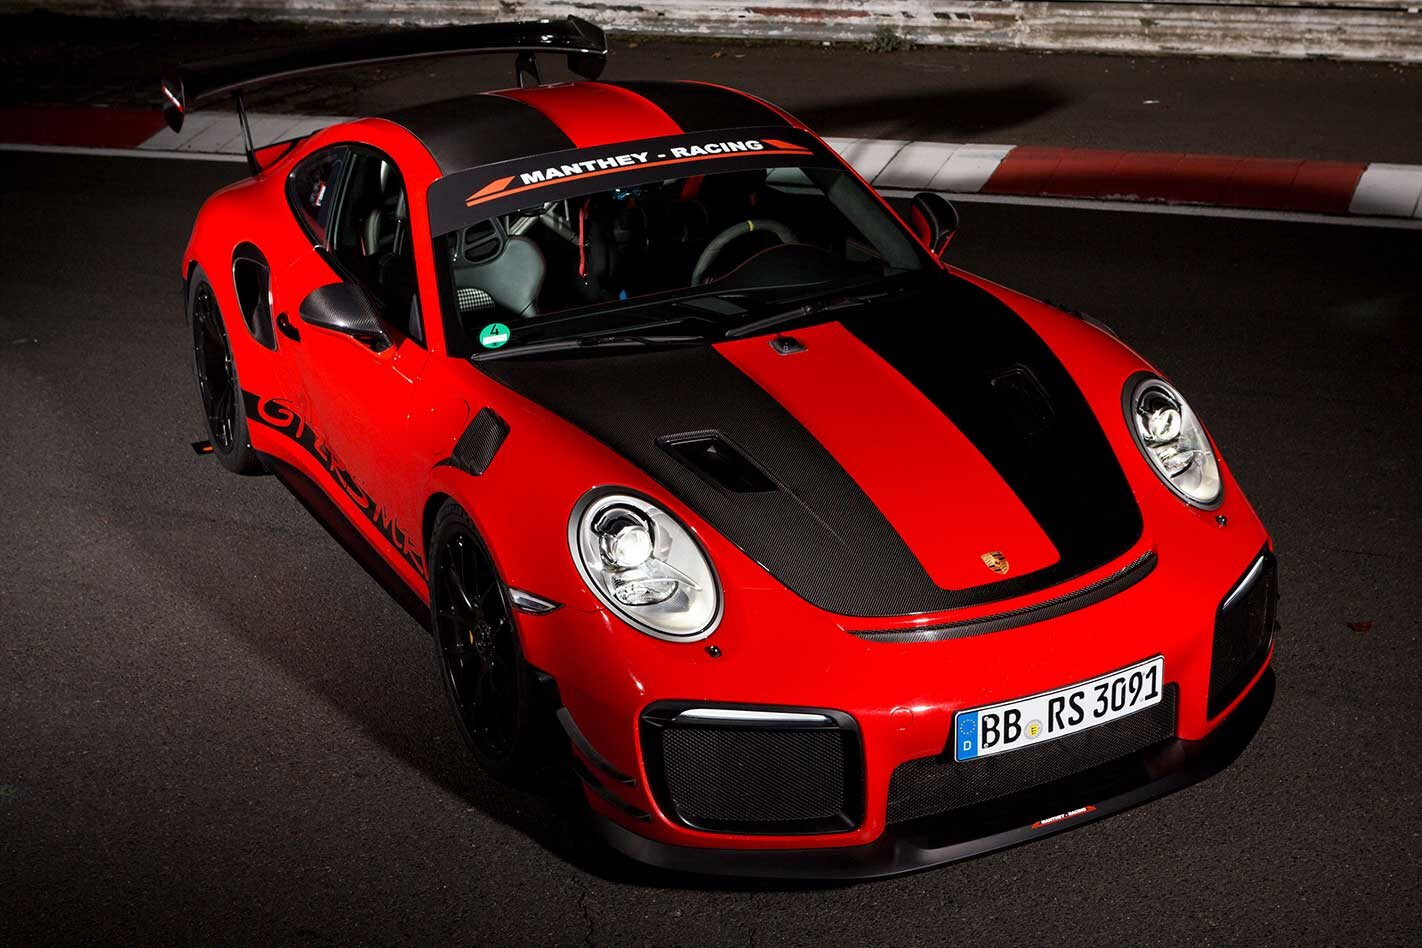 Australian Porsche 911 GT2 RS MR pricing and details announced